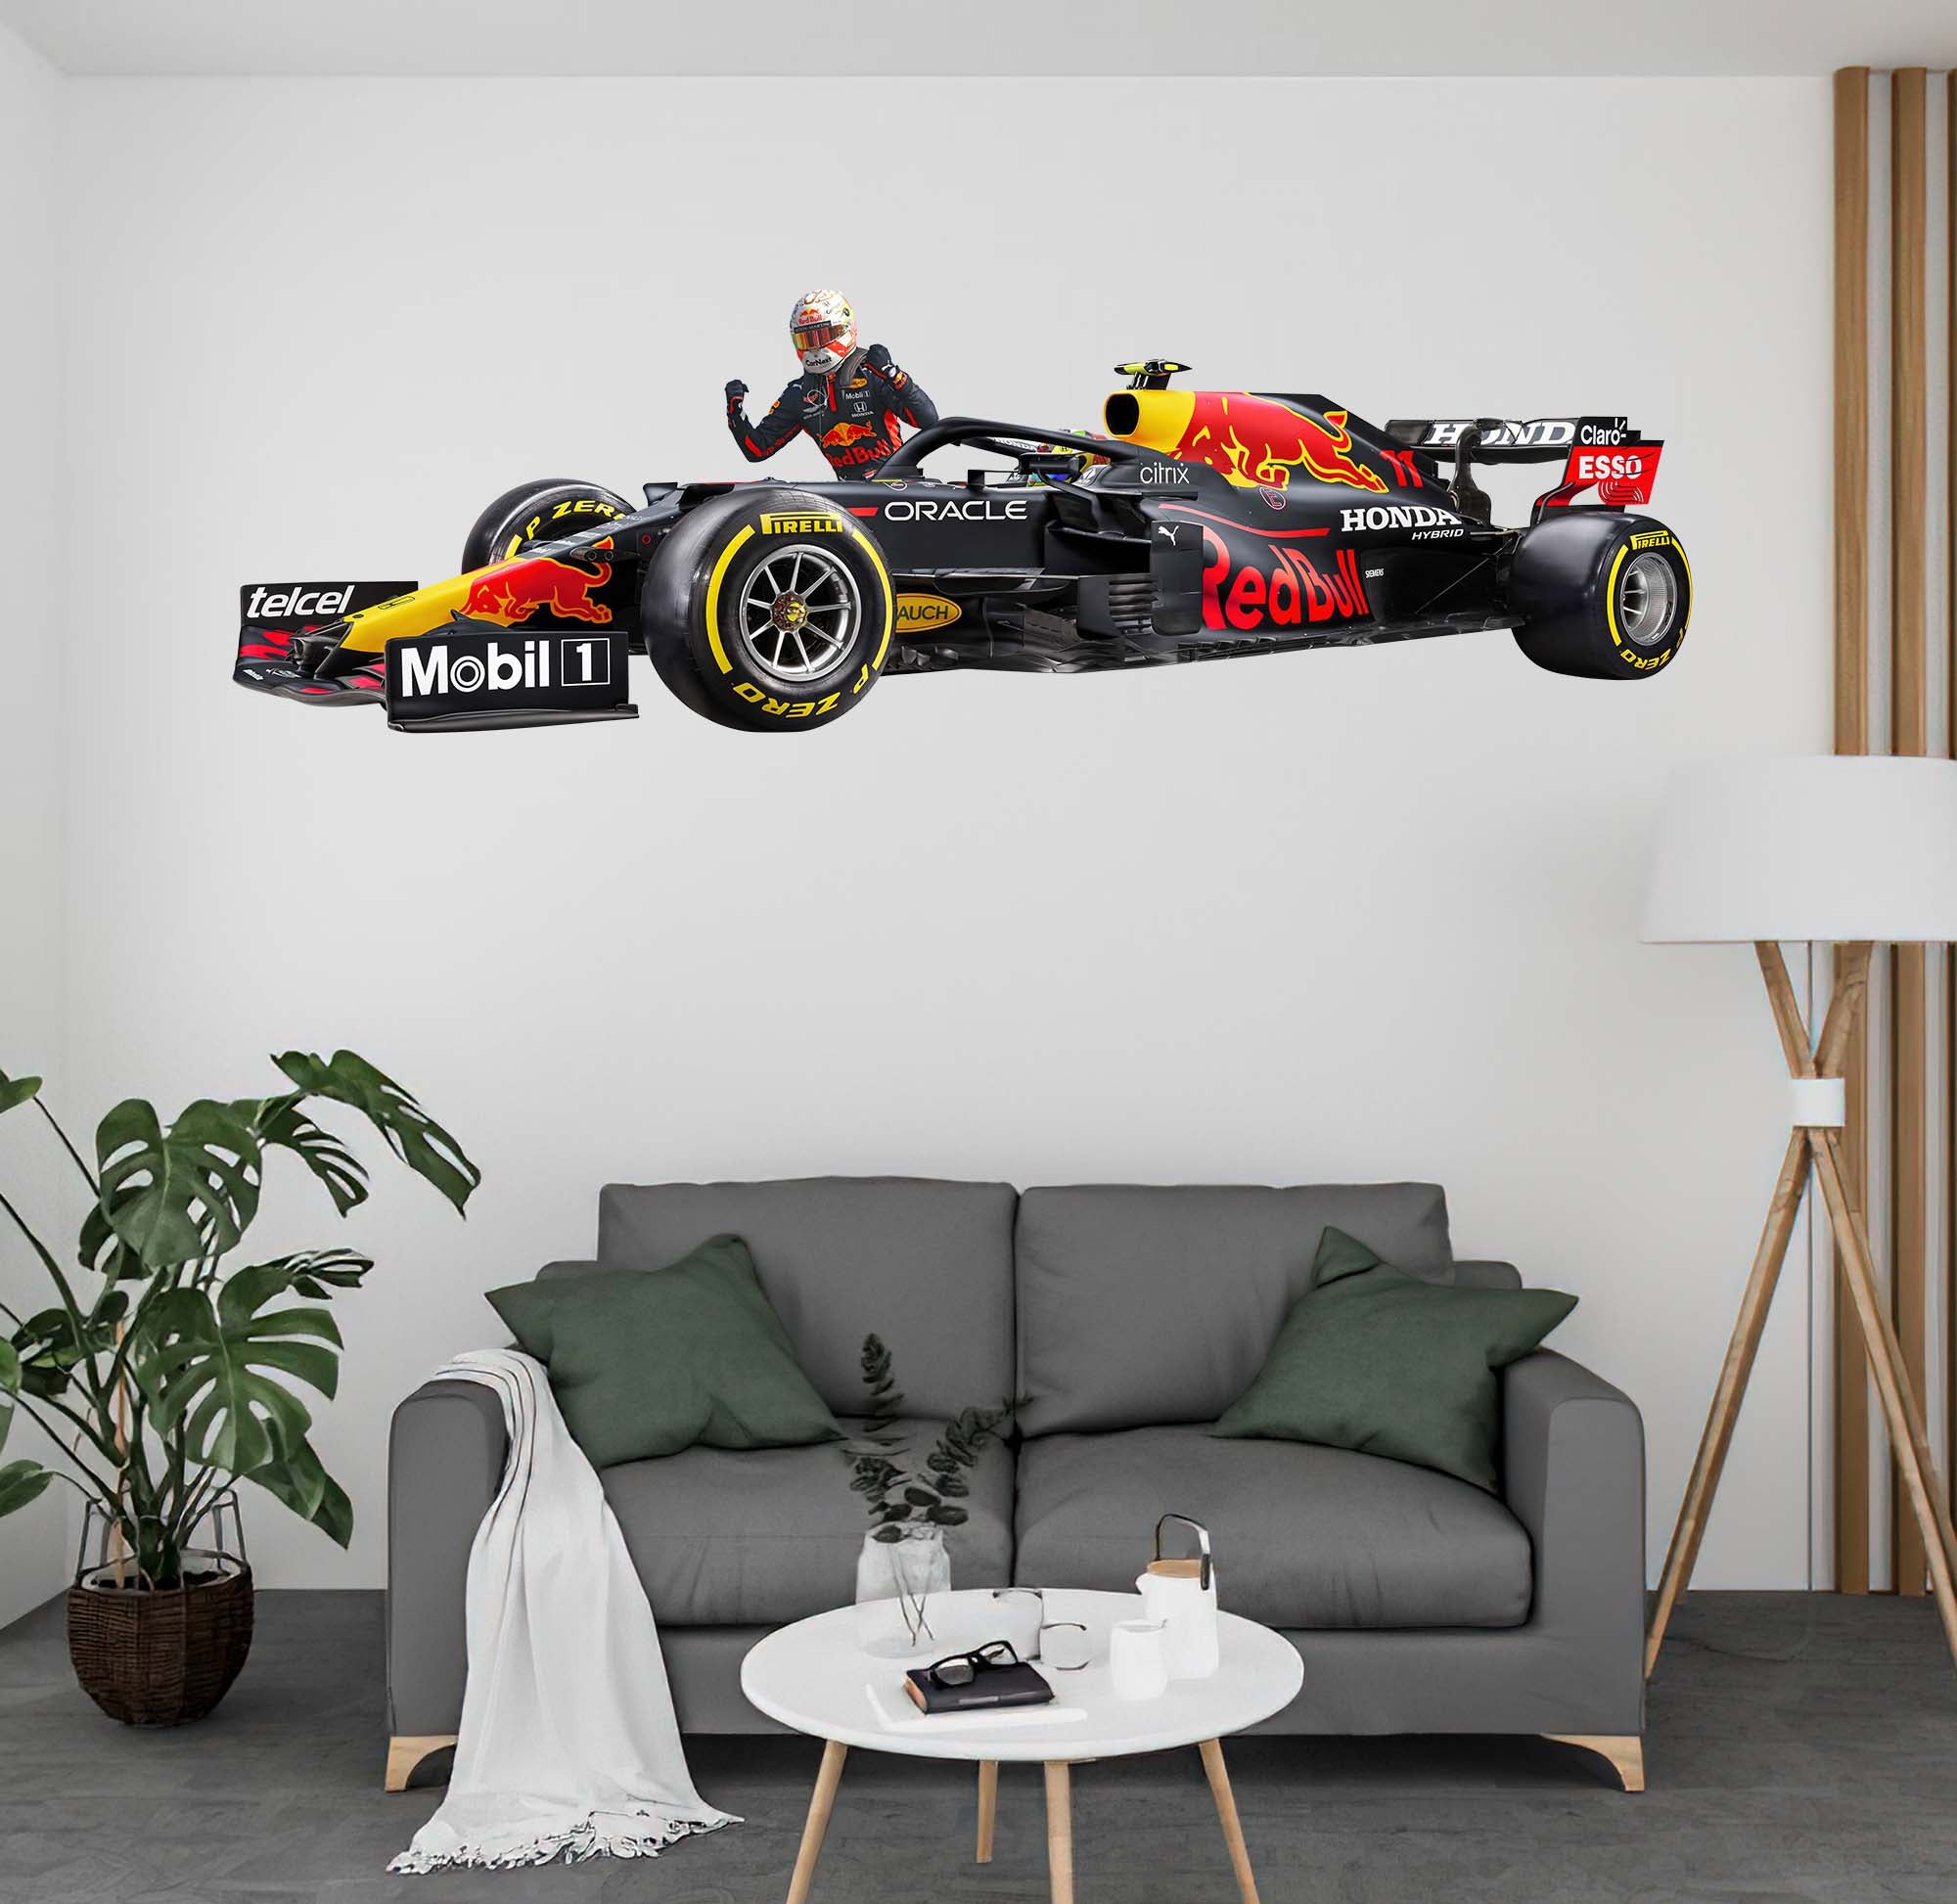 2021 Red Bulls Wall Decal Sticker with Max Verstappen Cherring, Removable Peel-N-Stick 002